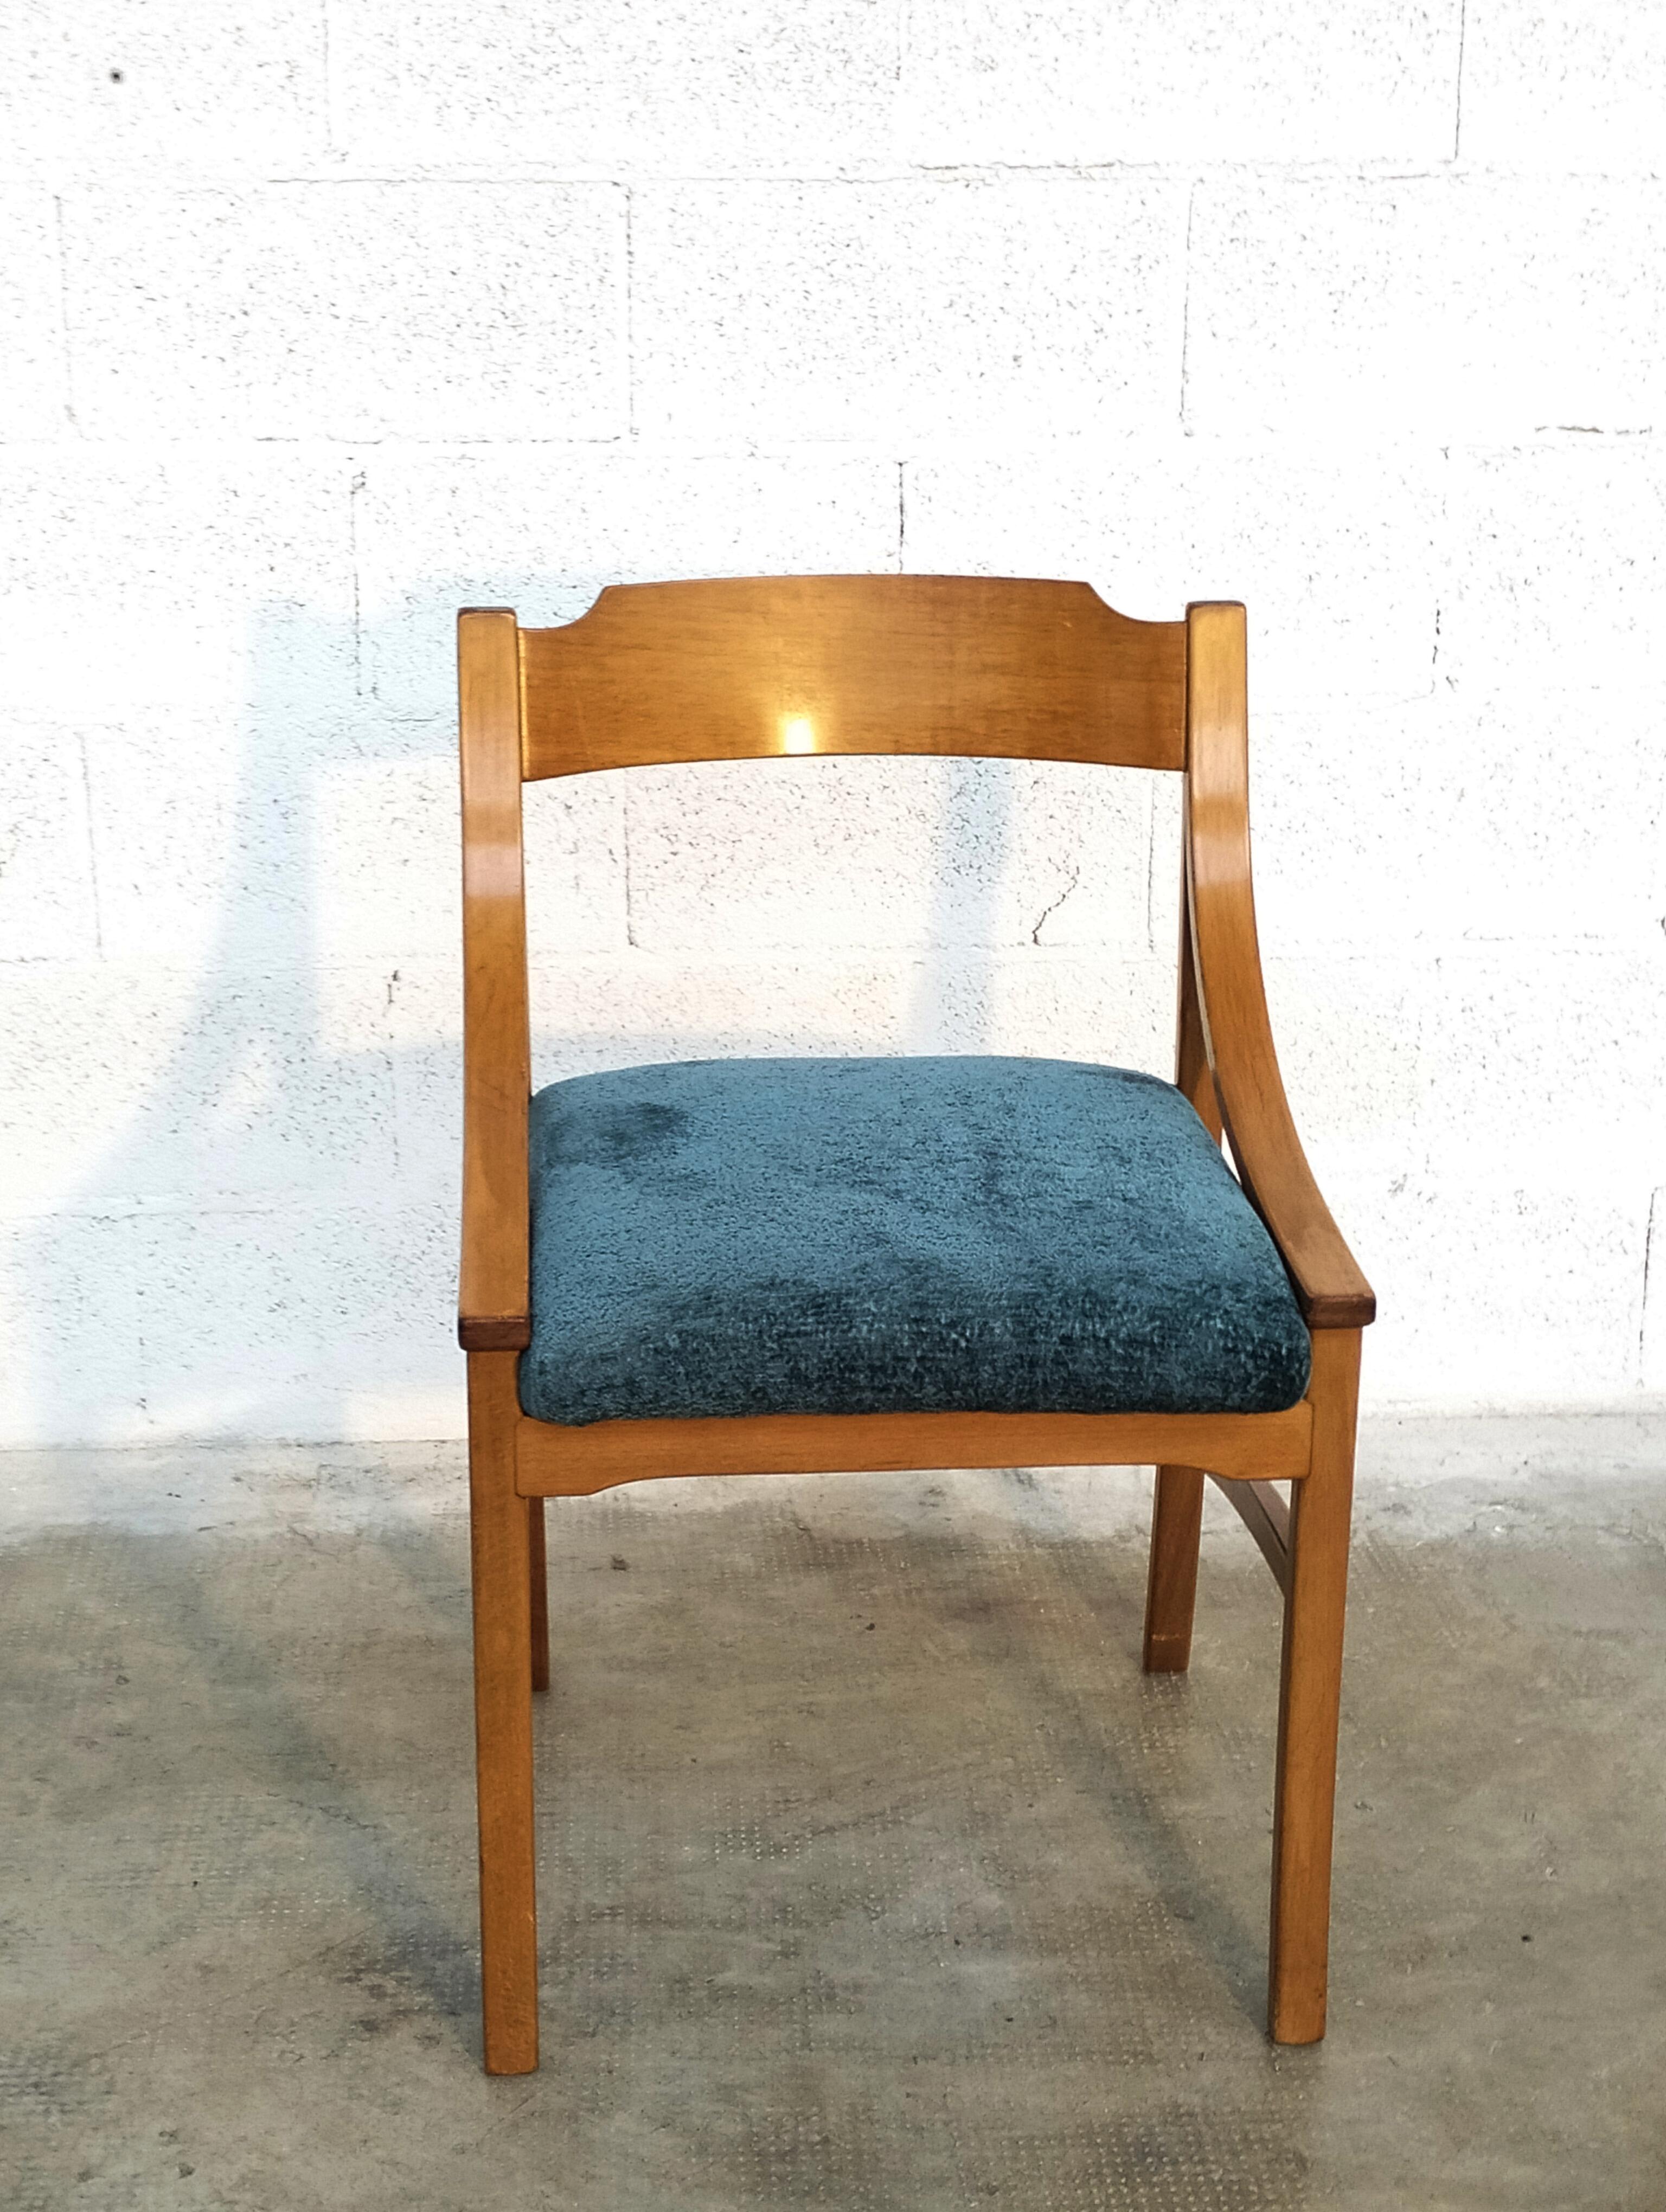 Set of 6 wooden dining chairs in the style of Ico Parisi for Cassina 70s
Structure in light wood and coverings in light blue bouclé (just redone).